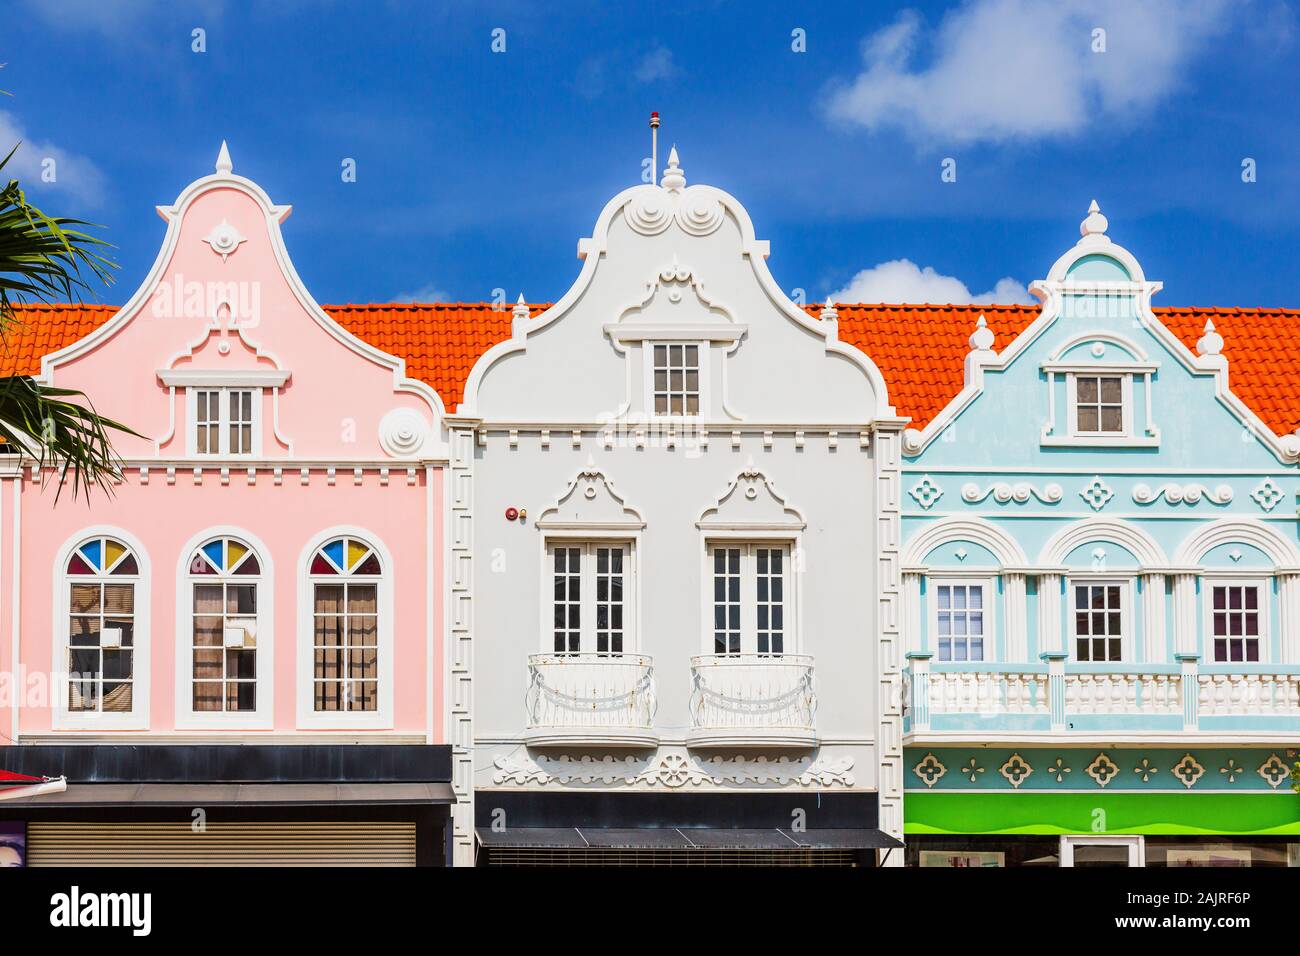 Aruba, Netherlands Antilles. Details of the old town architecture. Stock Photo